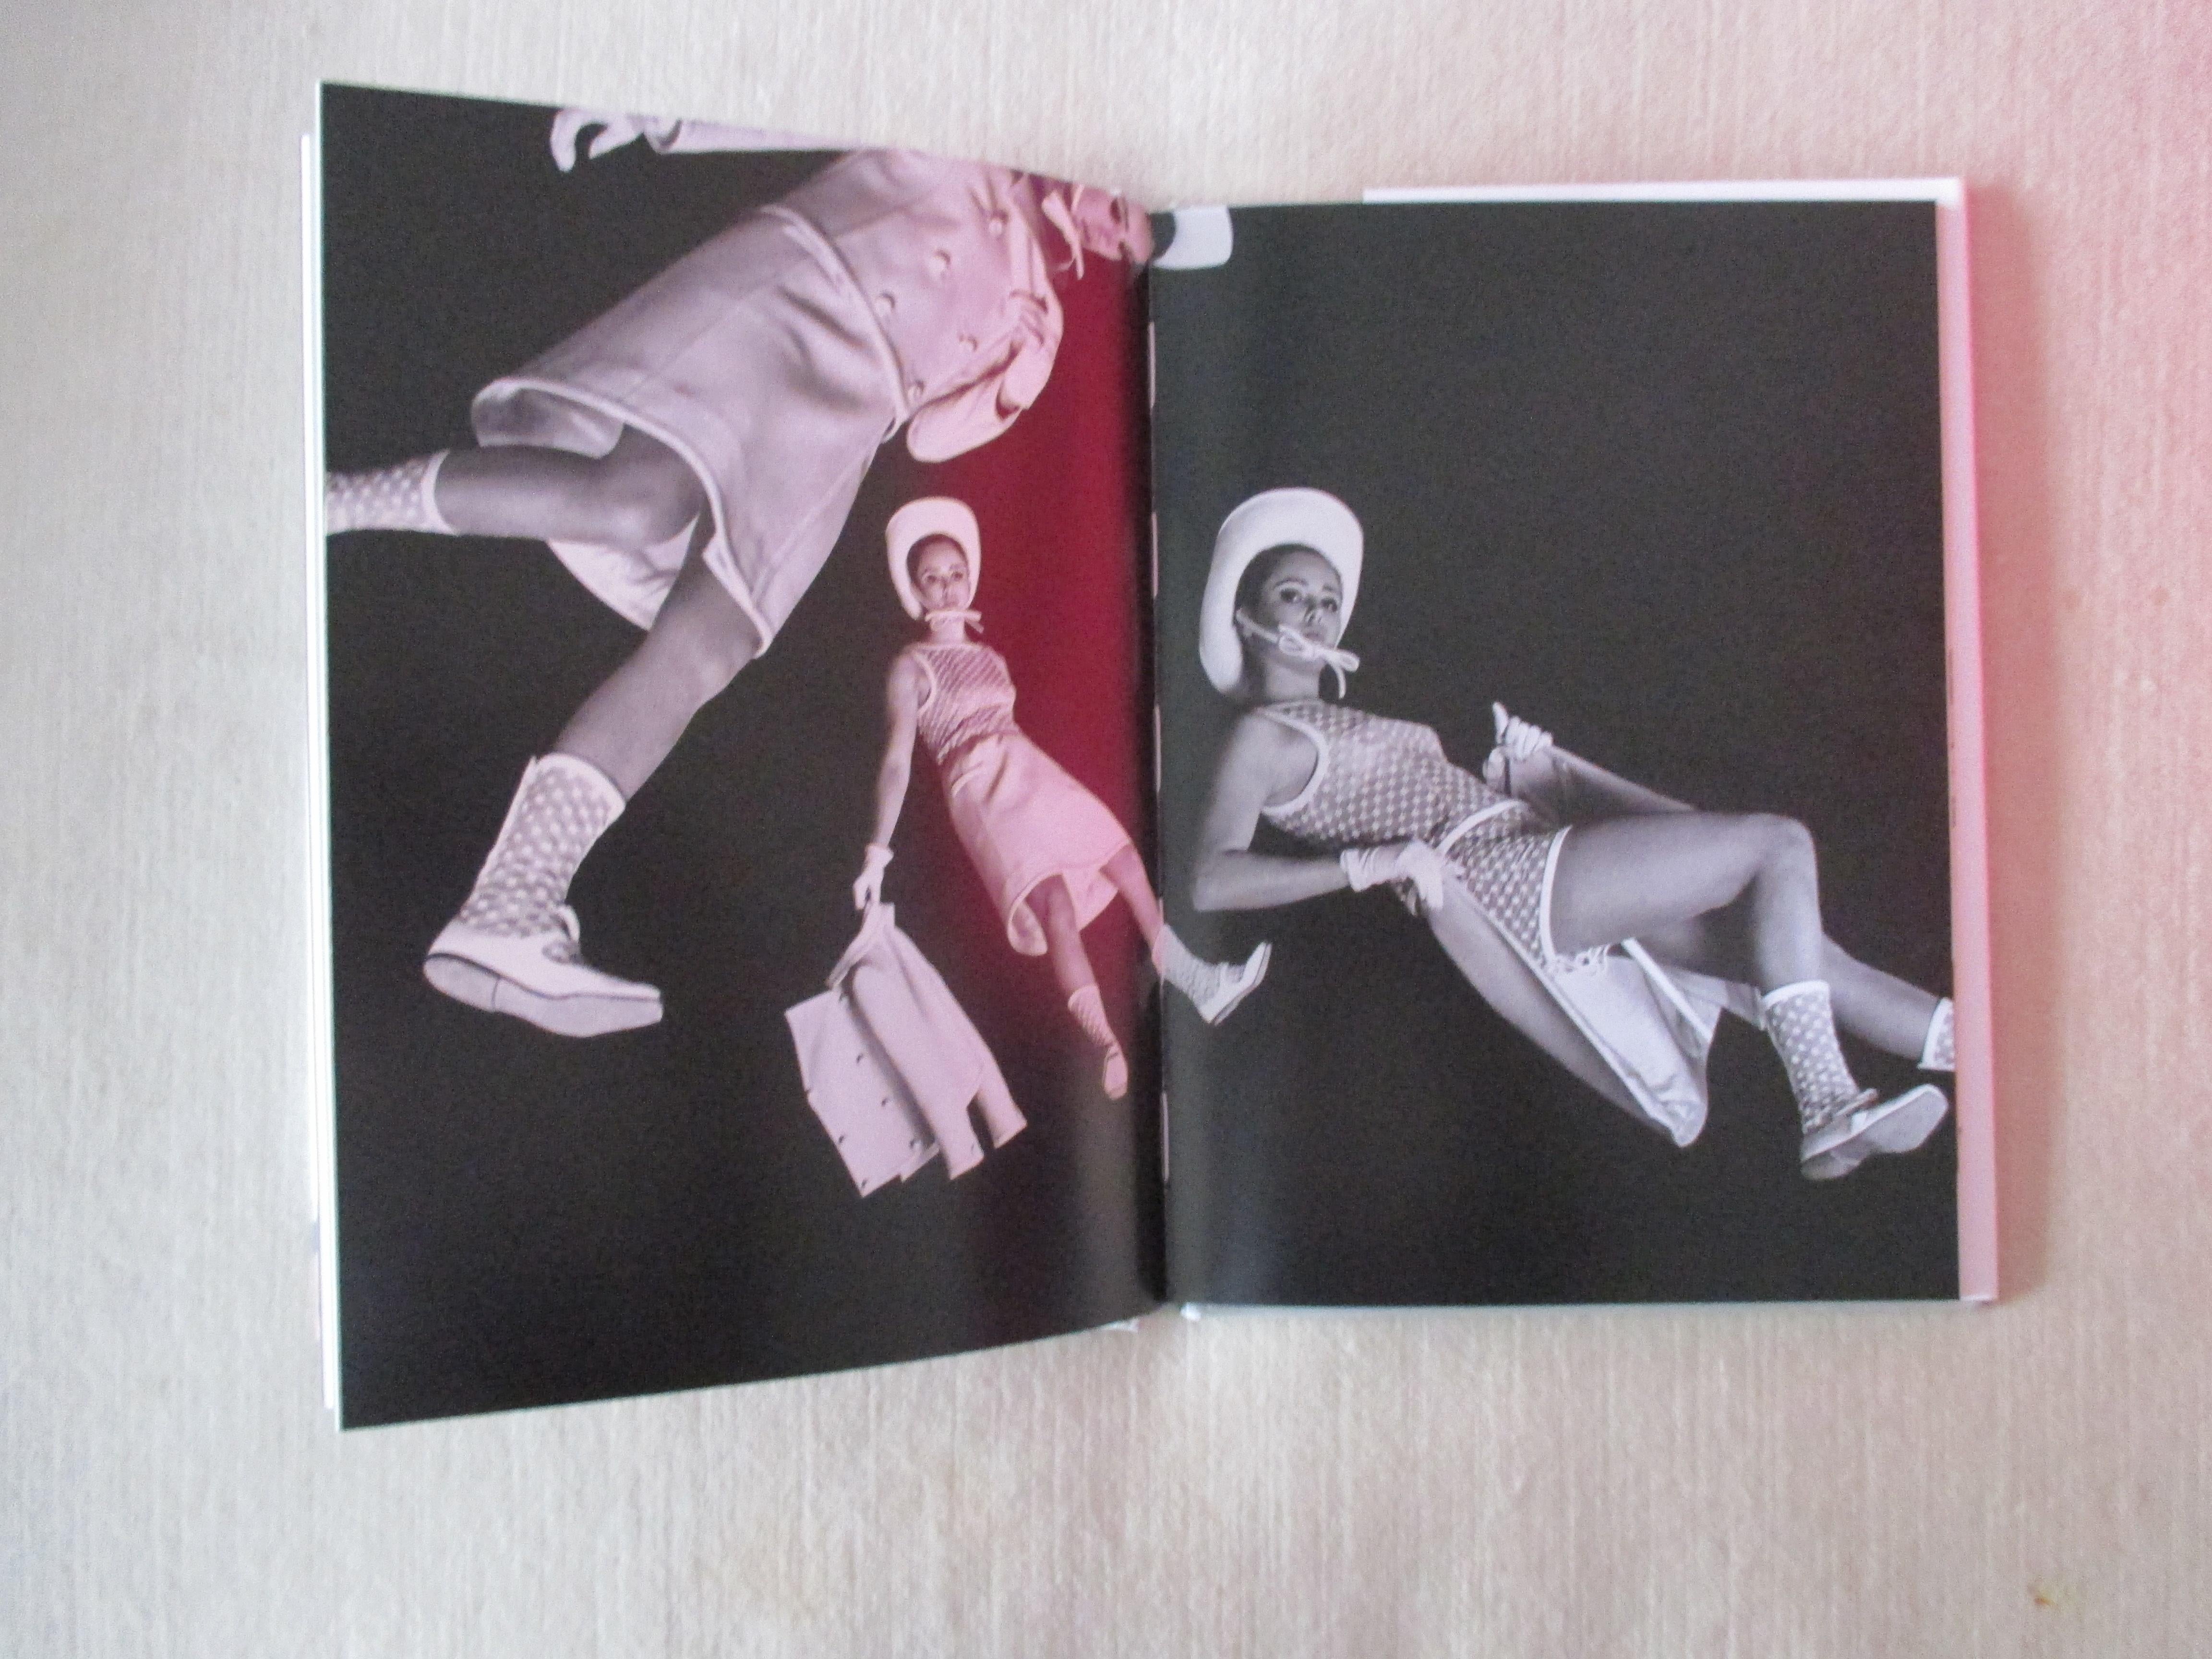 Courreges vintage book by Aussoline
Andre Courreges, known as the 